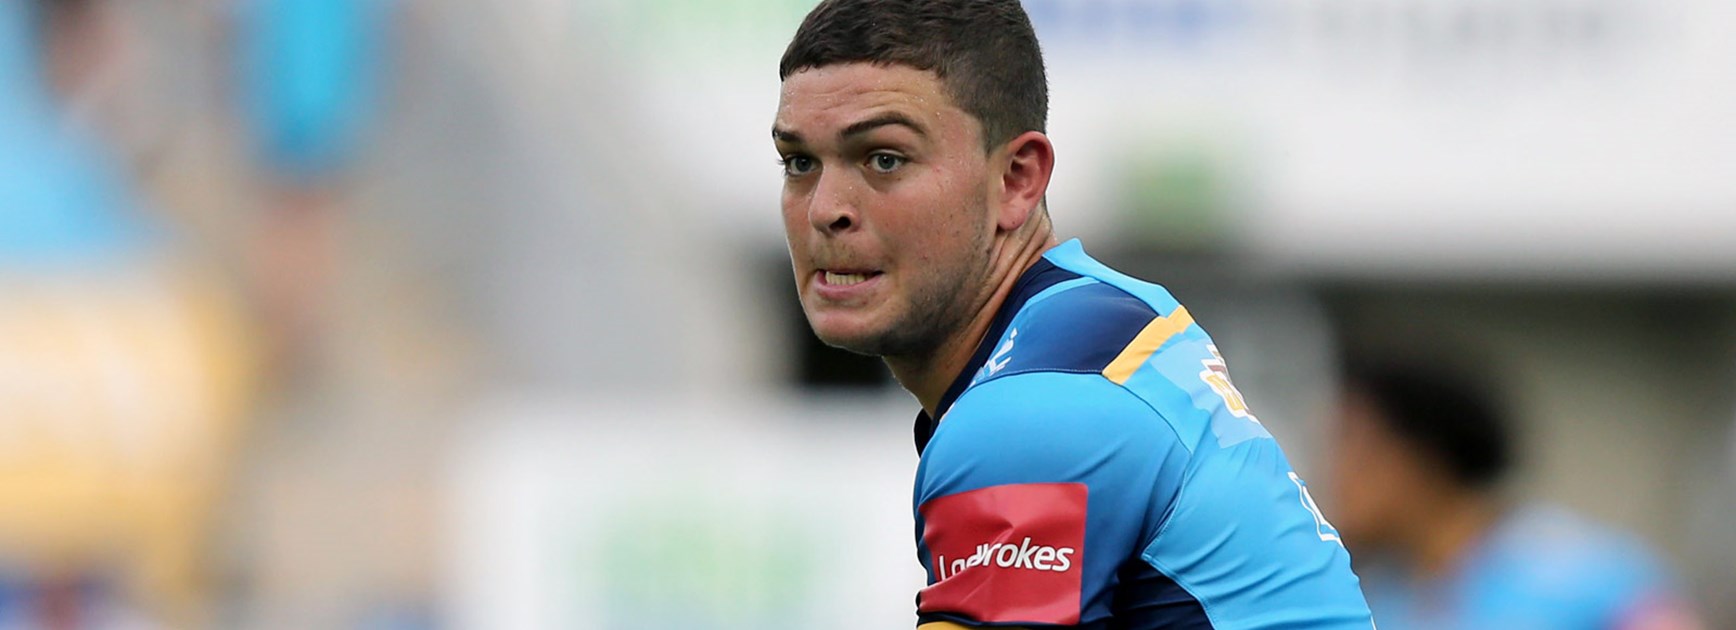 Titans halfback Ashley Taylor wants to be more involved in his side's attack.